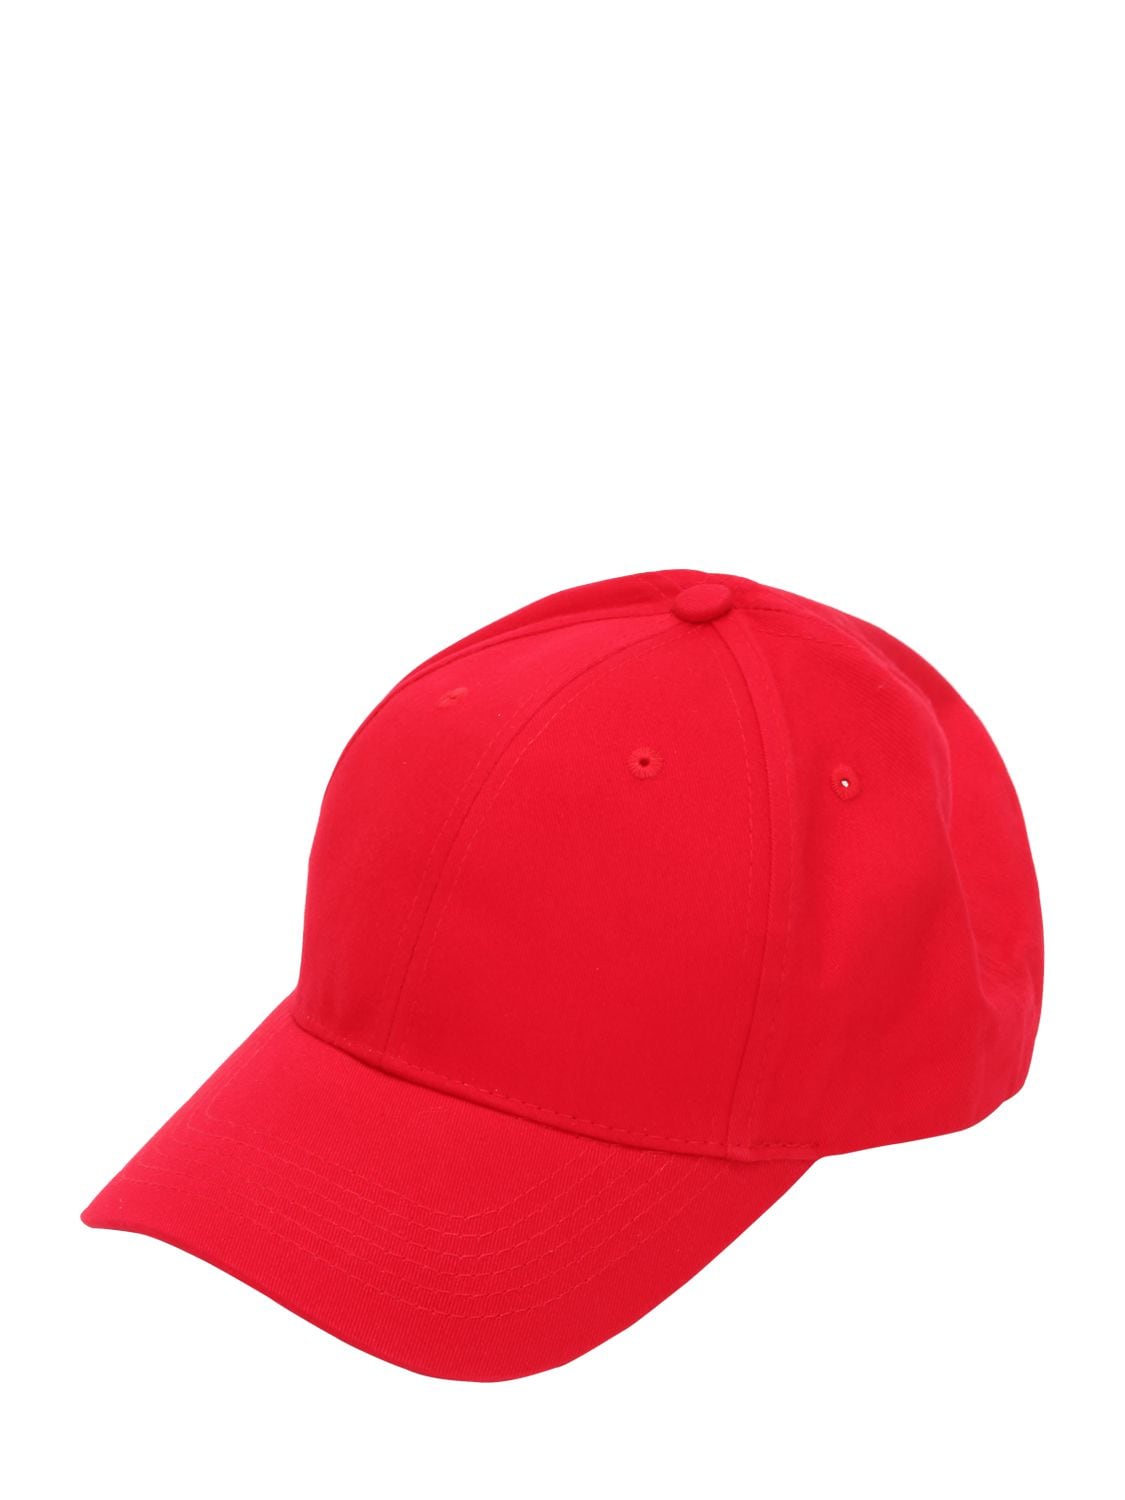 Famt - Fuck Art Make Tees Narcissism Cotton Baseball Hat In Red